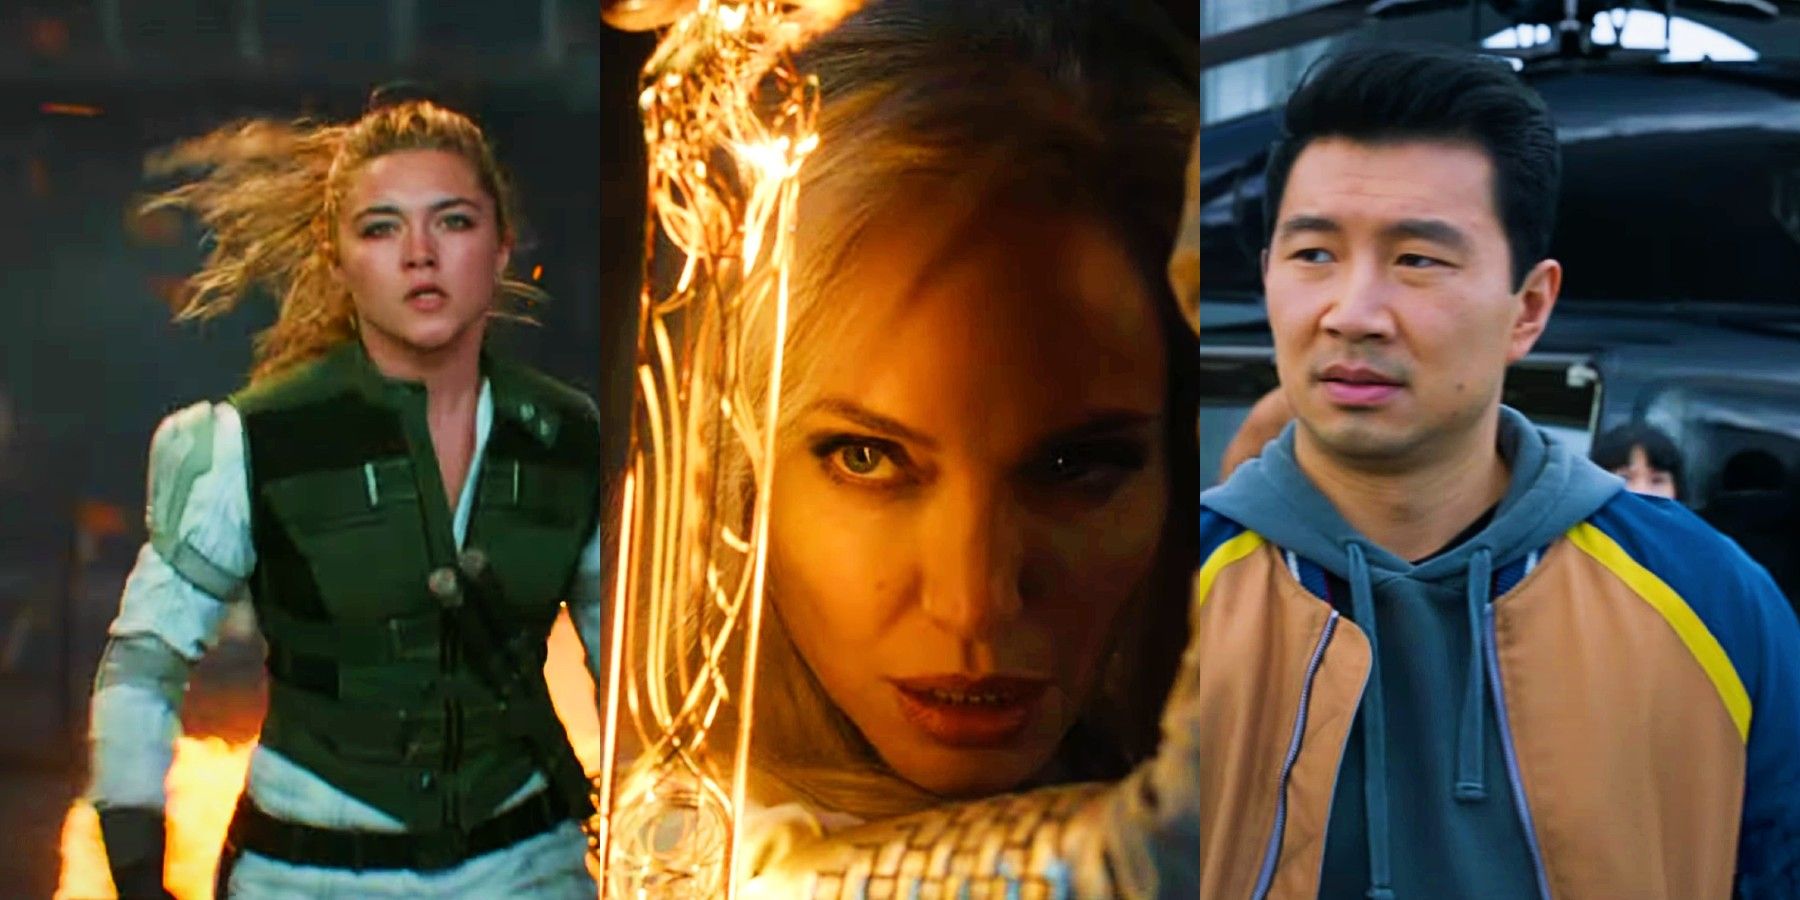 Florence Pugh as Yelena, Agenlina Jolie as Thena and Simu Liu as Shang-Chi in MCU Phase 4